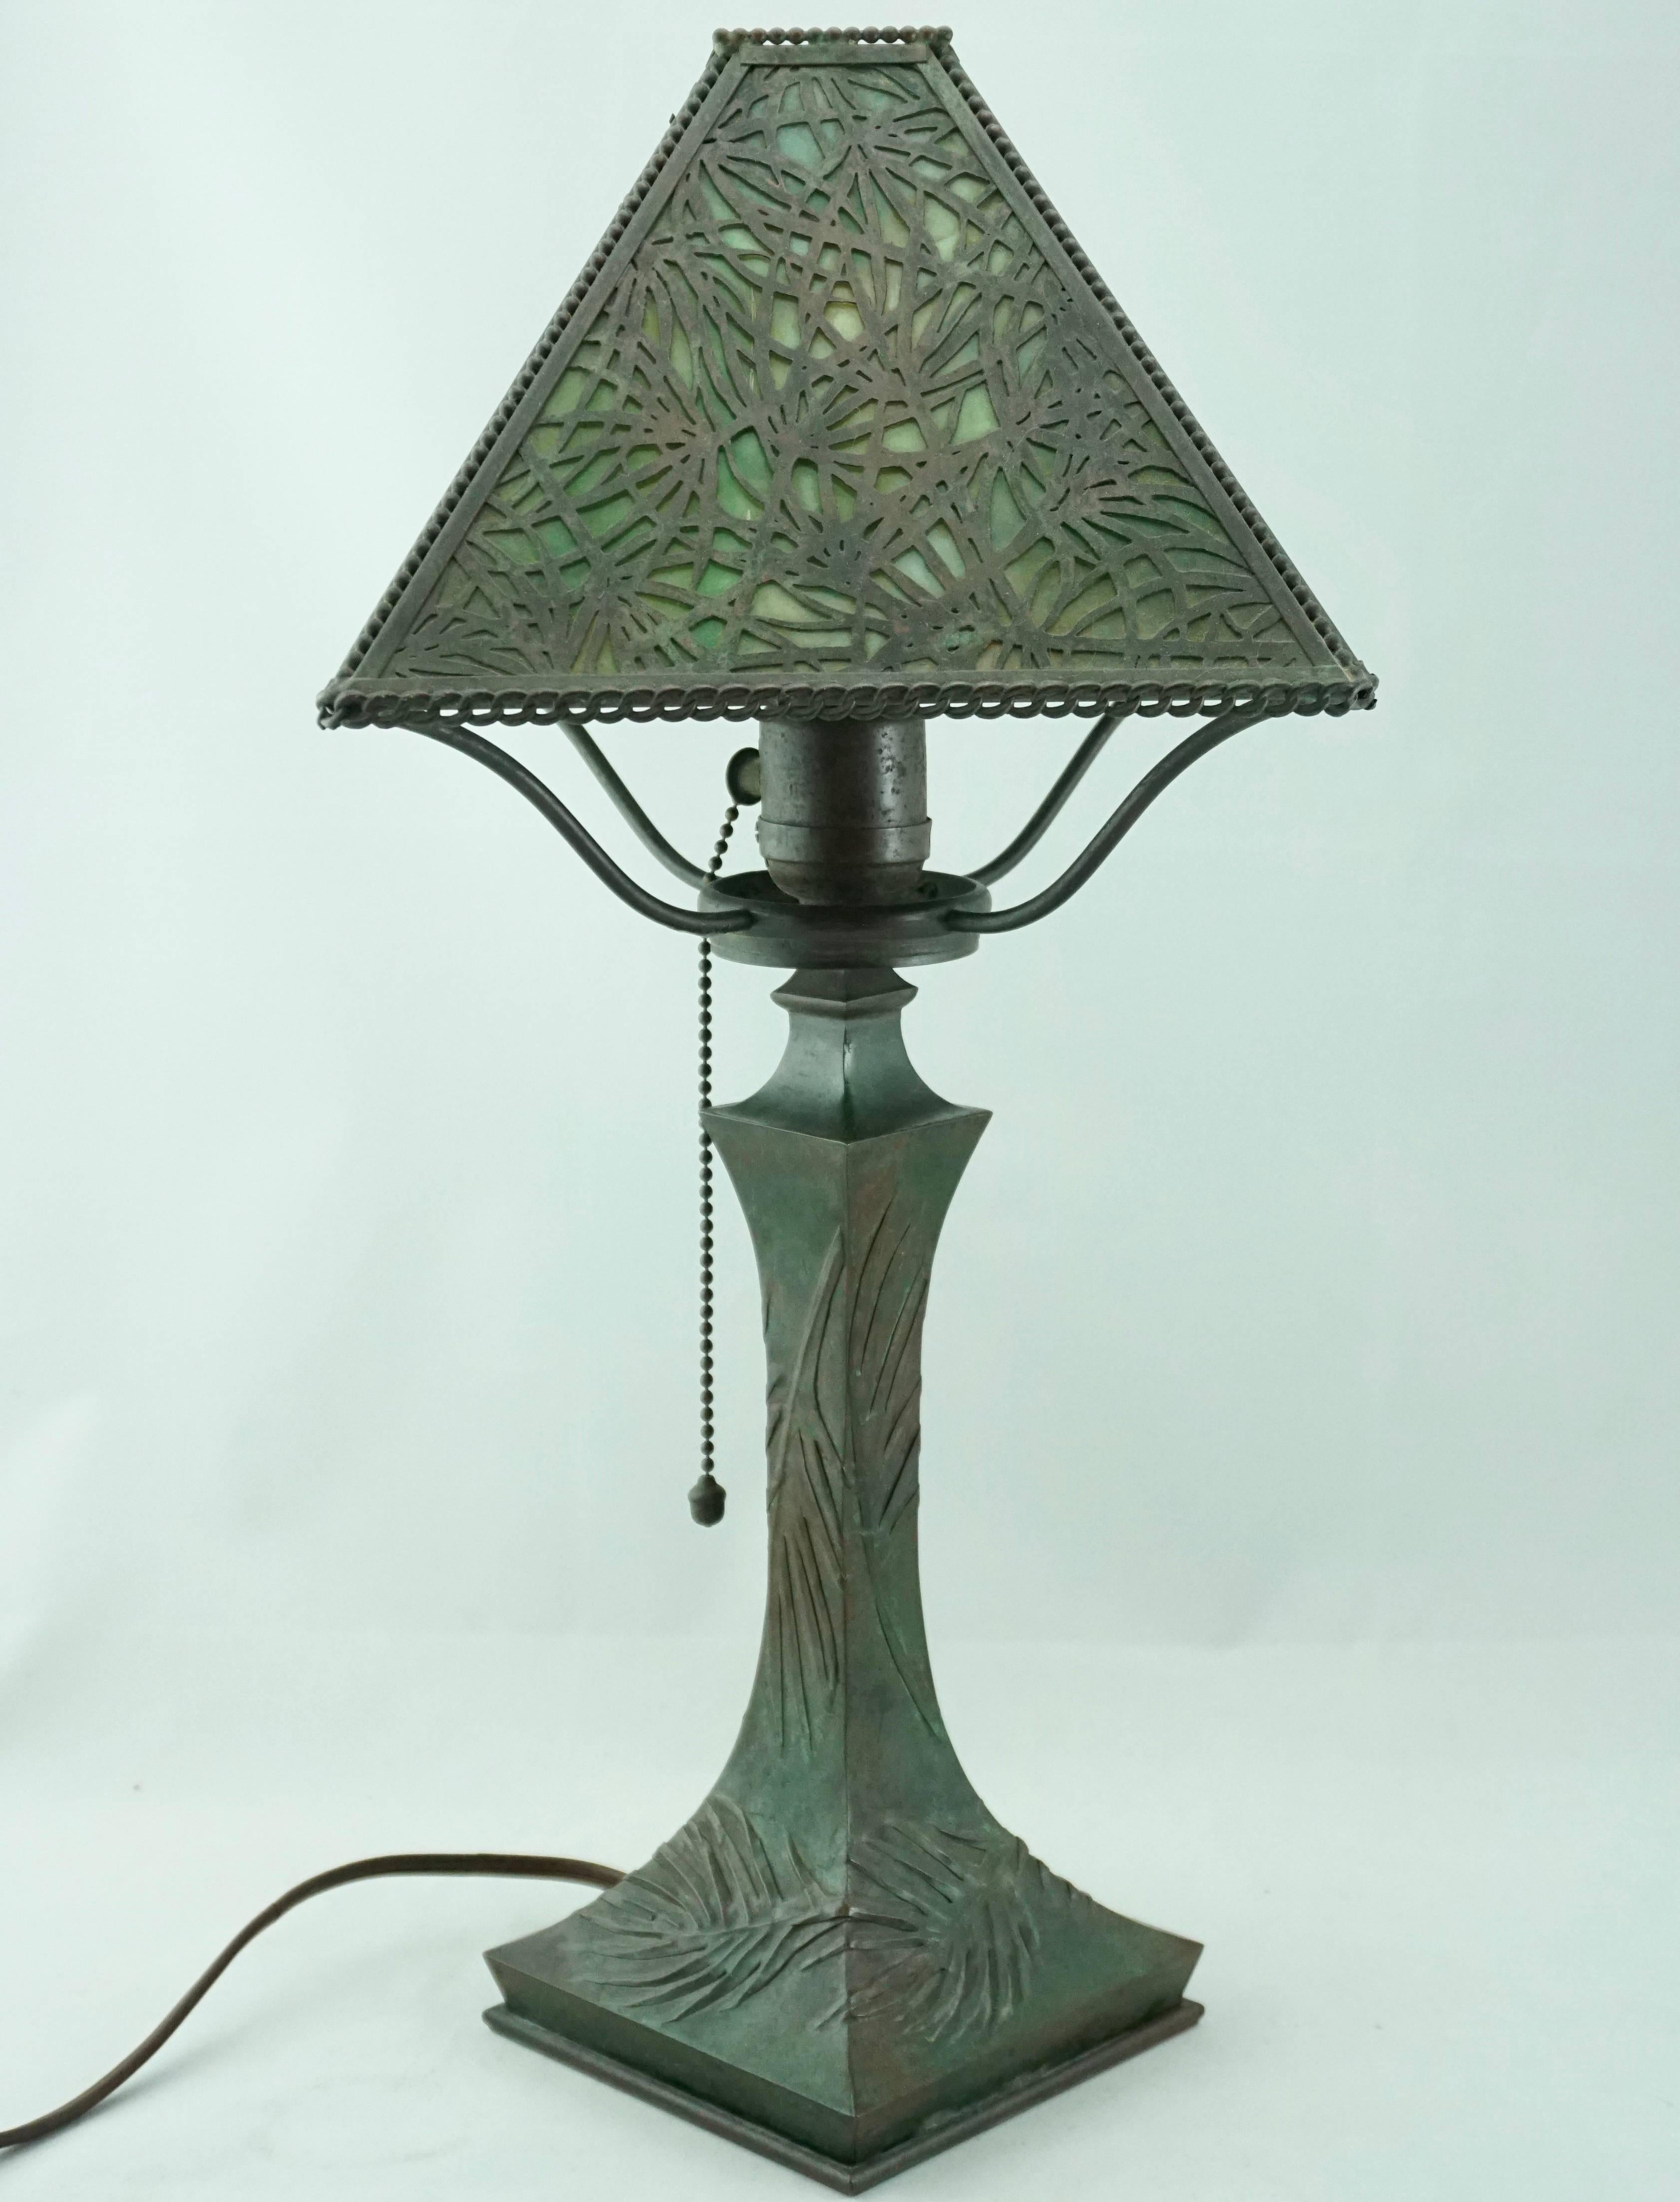 Riviere brass and bronze works / Riviere Studios table or desk lamp with beautiful brown and green patina, New York, NY, patinated bronze, slag glass, circa 1900. Similar to period Tiffany Studios Pinee Needle and Appolo Studios Lamps.

Measure: